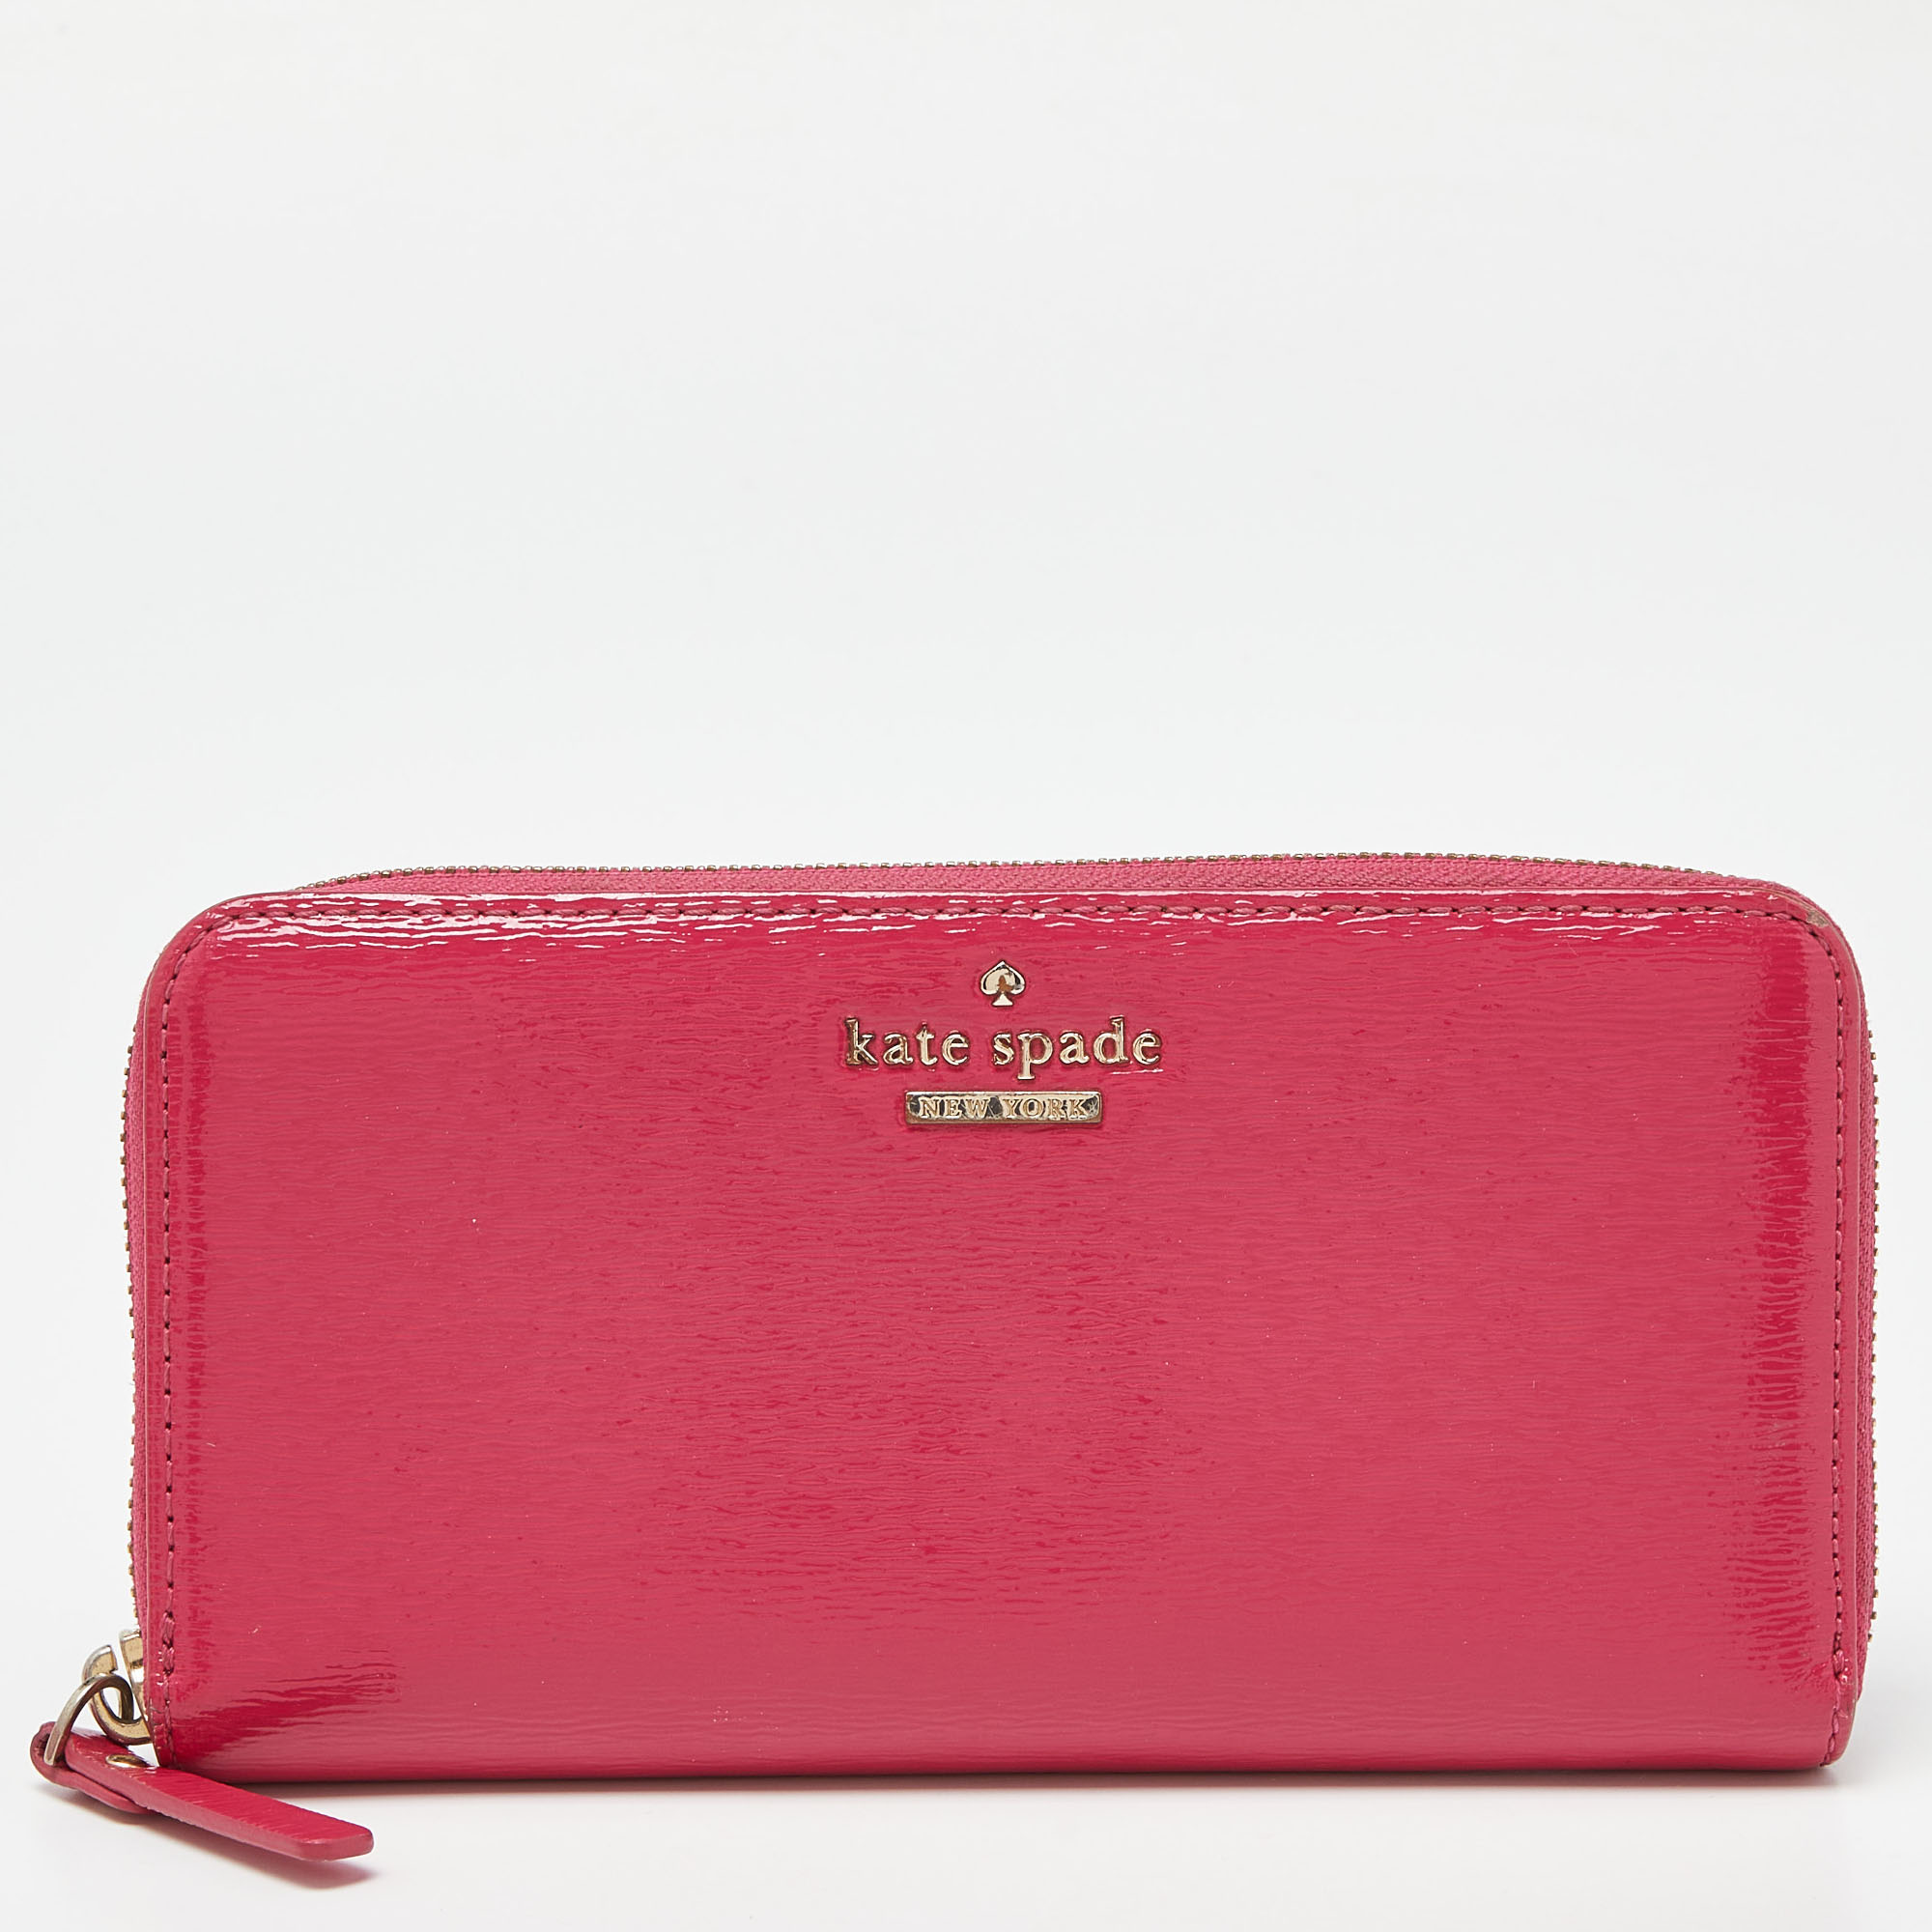 Kate spade pink patent leather zip around continental wallet